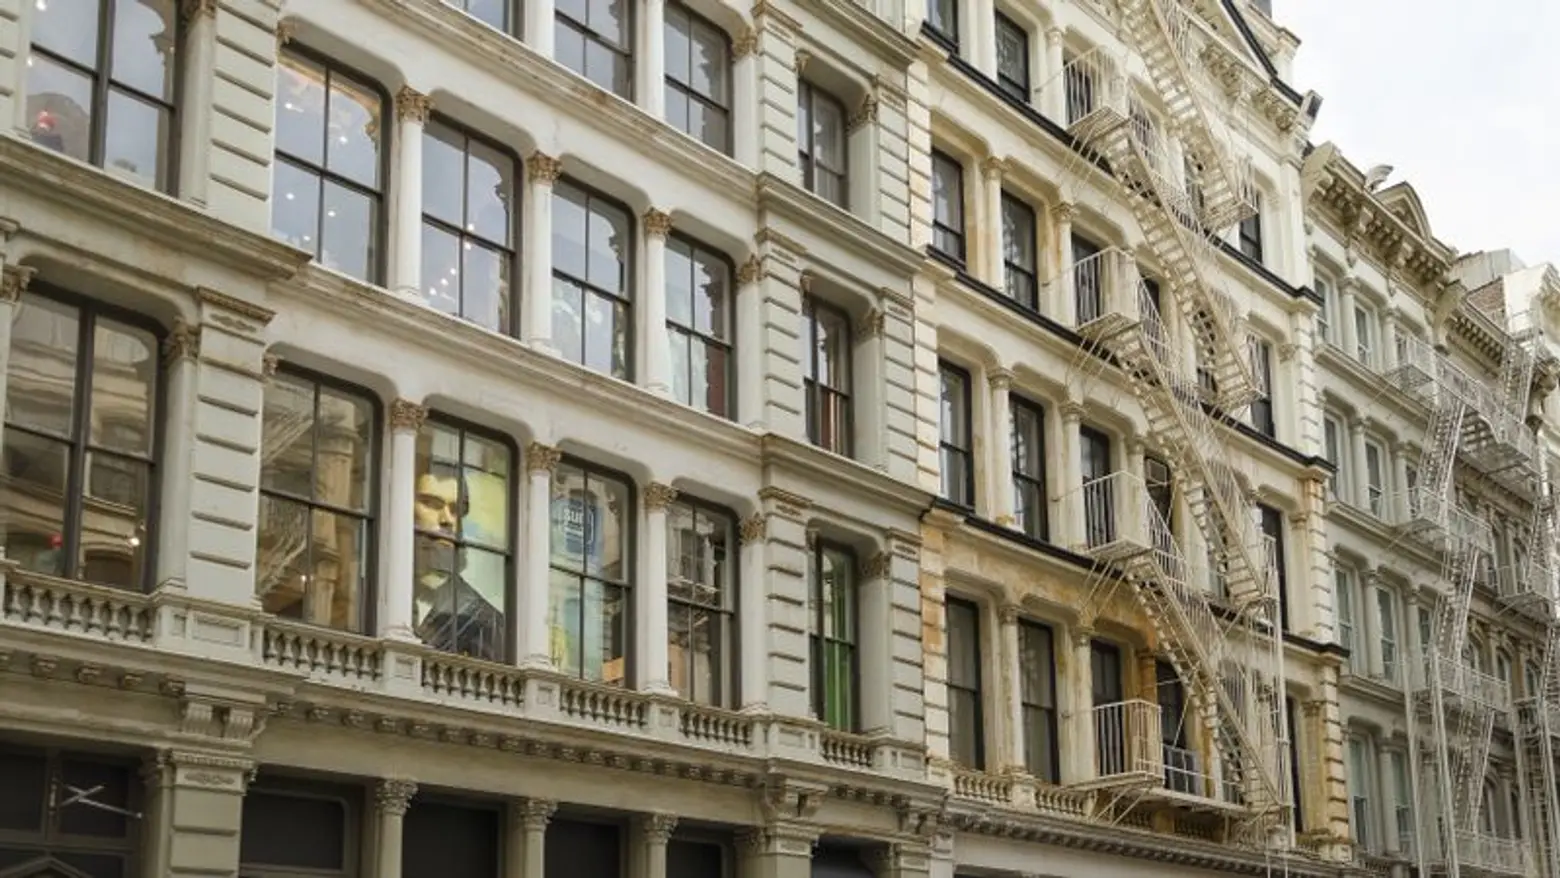 How to Play an Historic Building; NYC Is Pretty Polluted Says the EPA